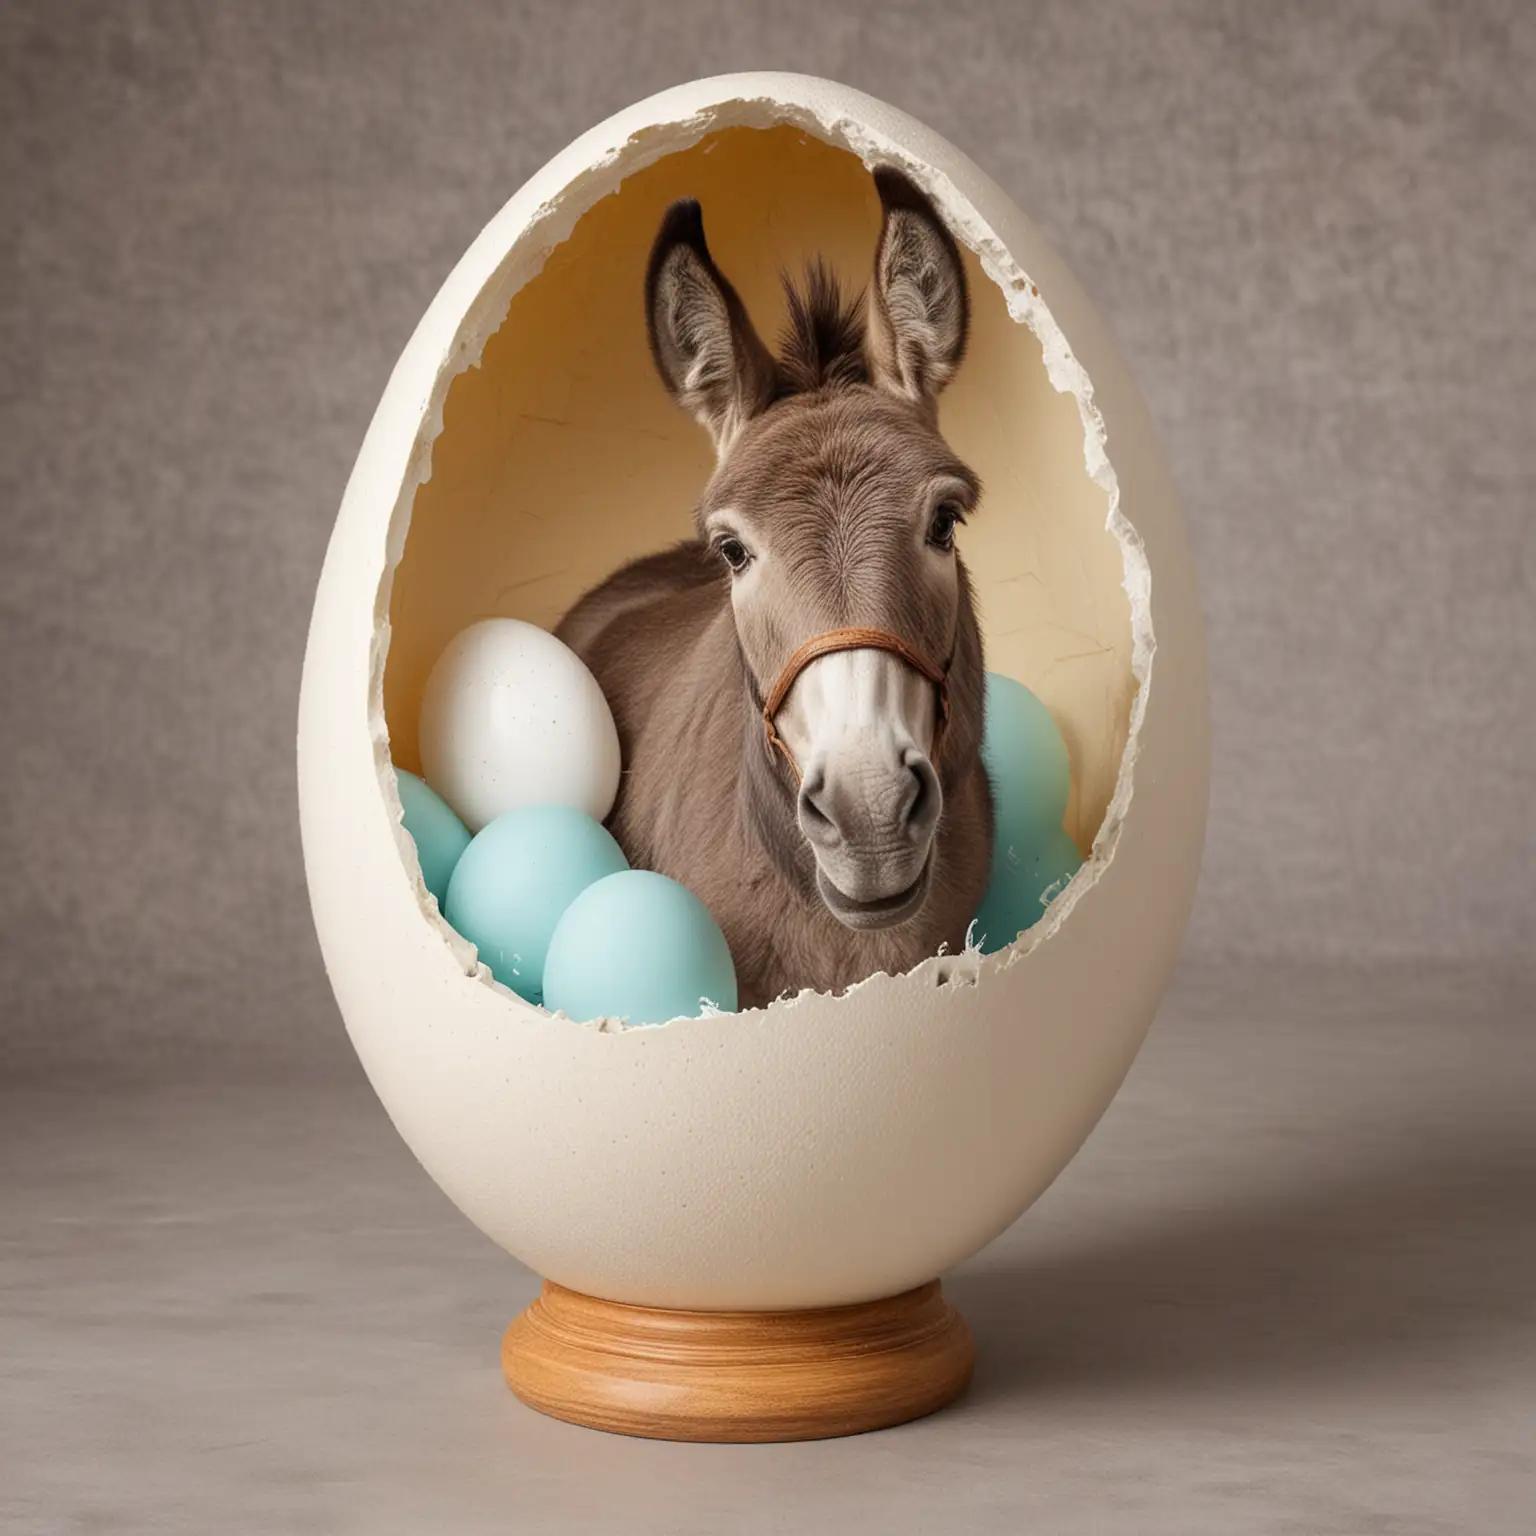 Curious Donkey Peering into a Giant Egg